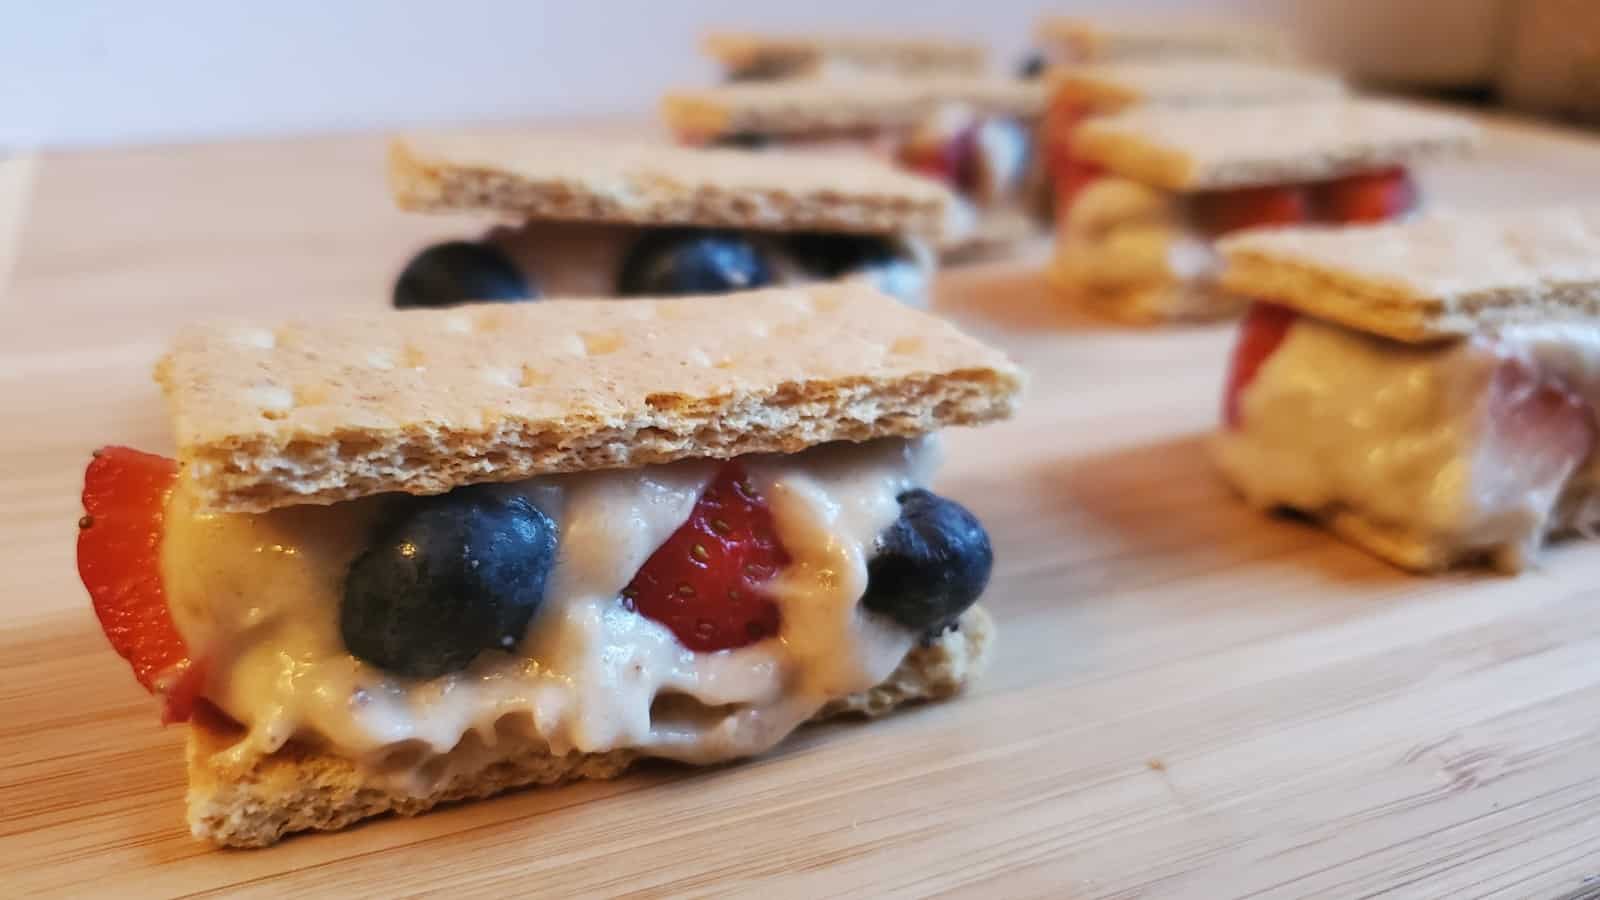 Image shows Banana ice cream sandwiches with strawberries and blueberries on a wooden board.